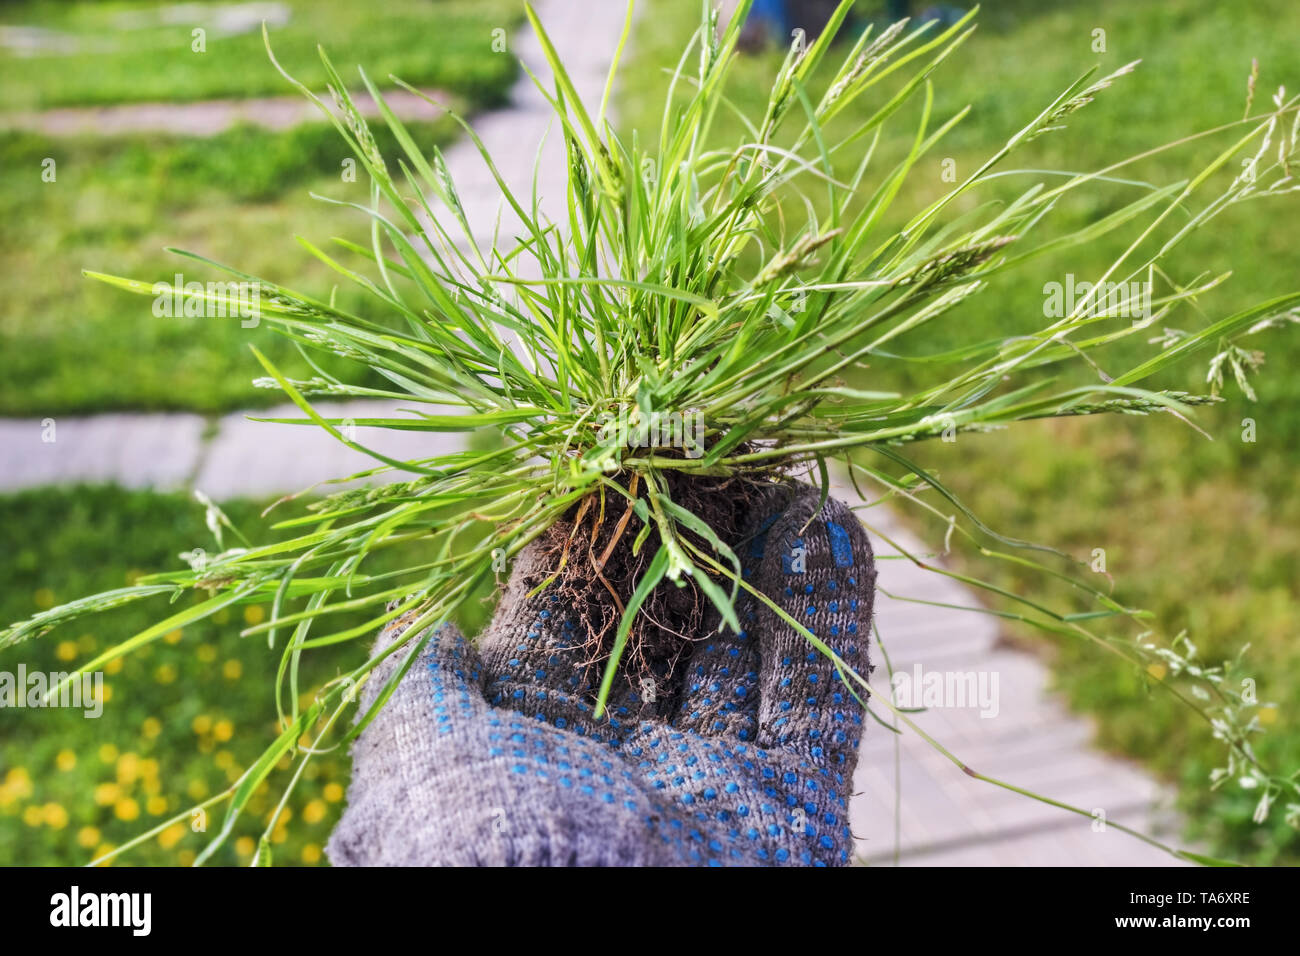 Green young grass for planting in hands of glove at day Stock Photo